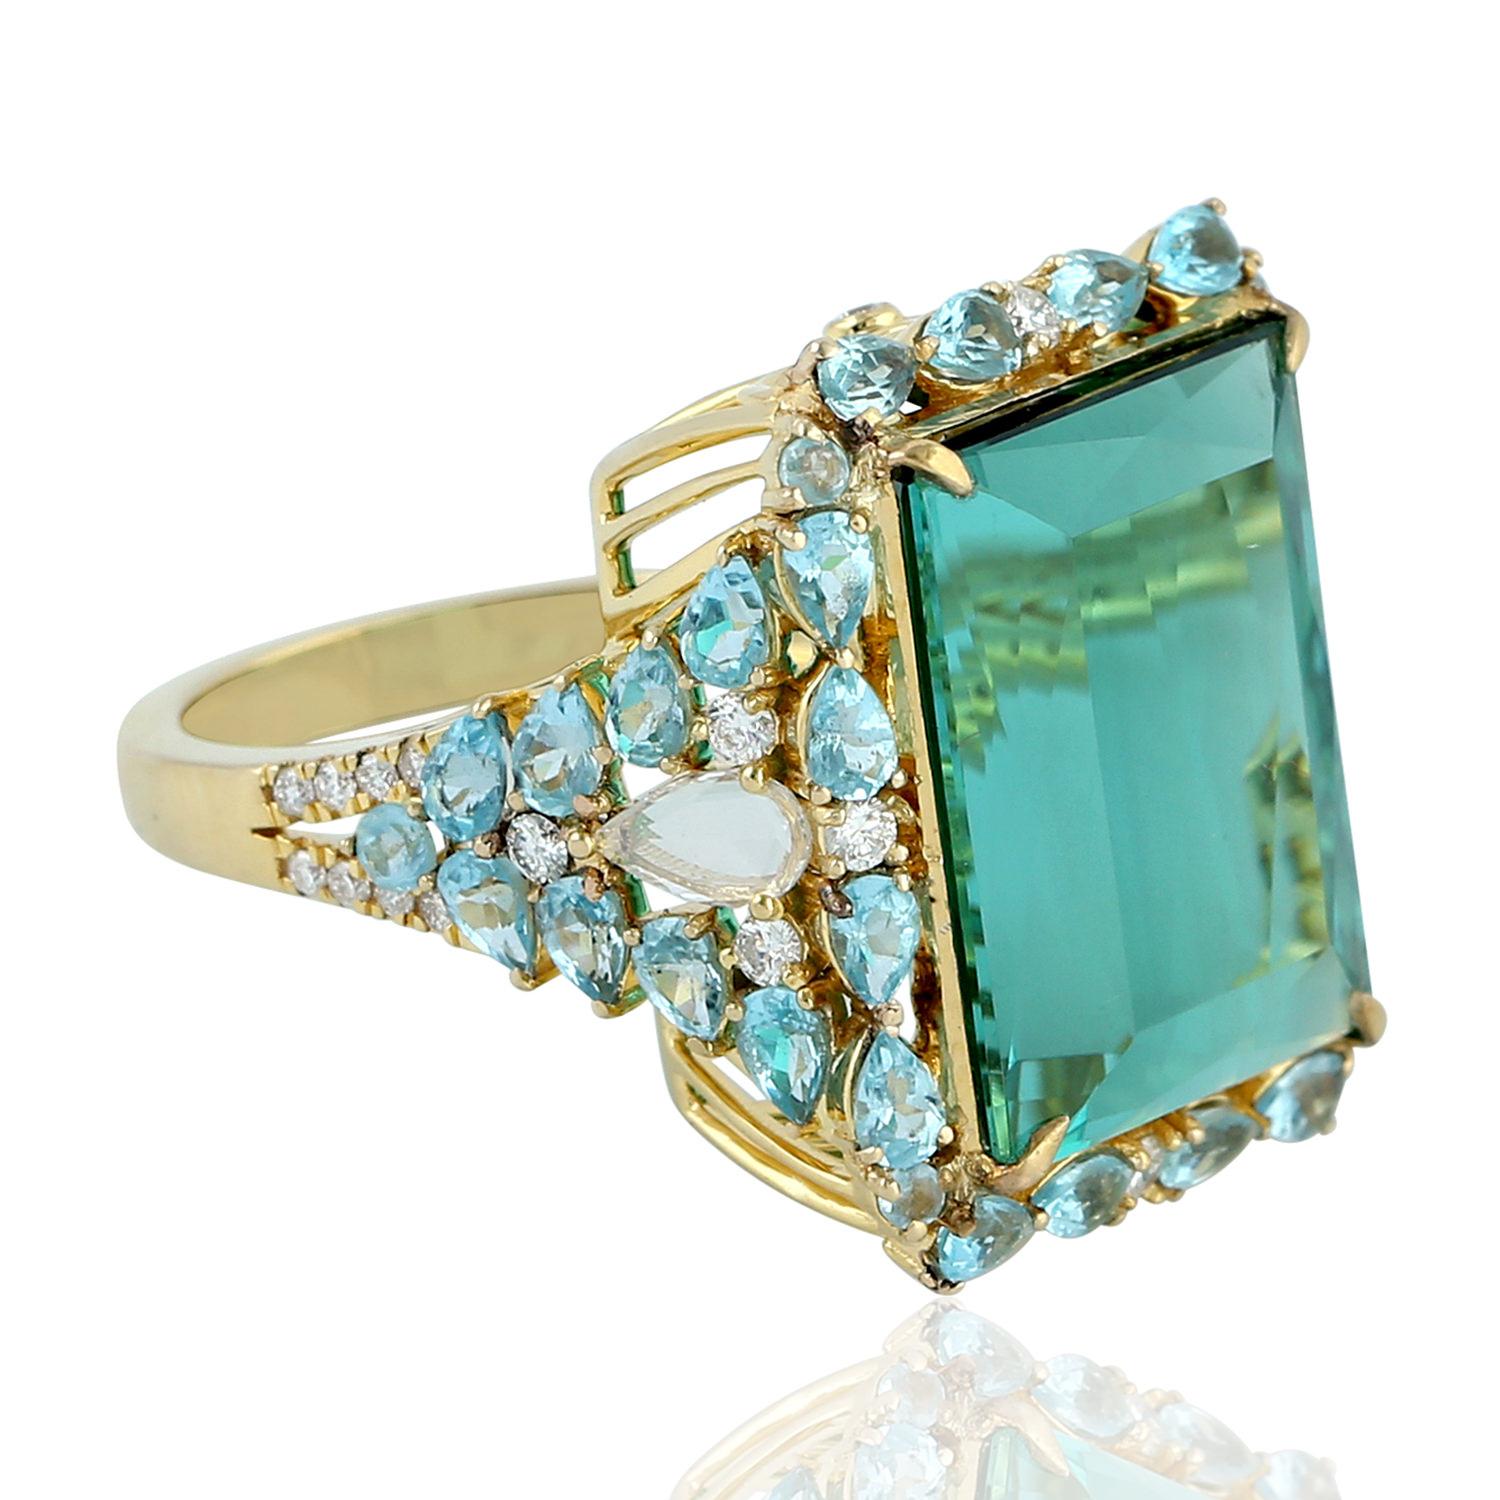 Beautiful Apetite Tourmaline and Diamond Ring set in 18K Yellow Gold. This ring is truly special as the blue color of tourmaline is so rare with brilliant princess cut.

Ring Size: 7  ( can be sized )

18KT: 7.507gms
Diamond: 0.49cts
APETITE: